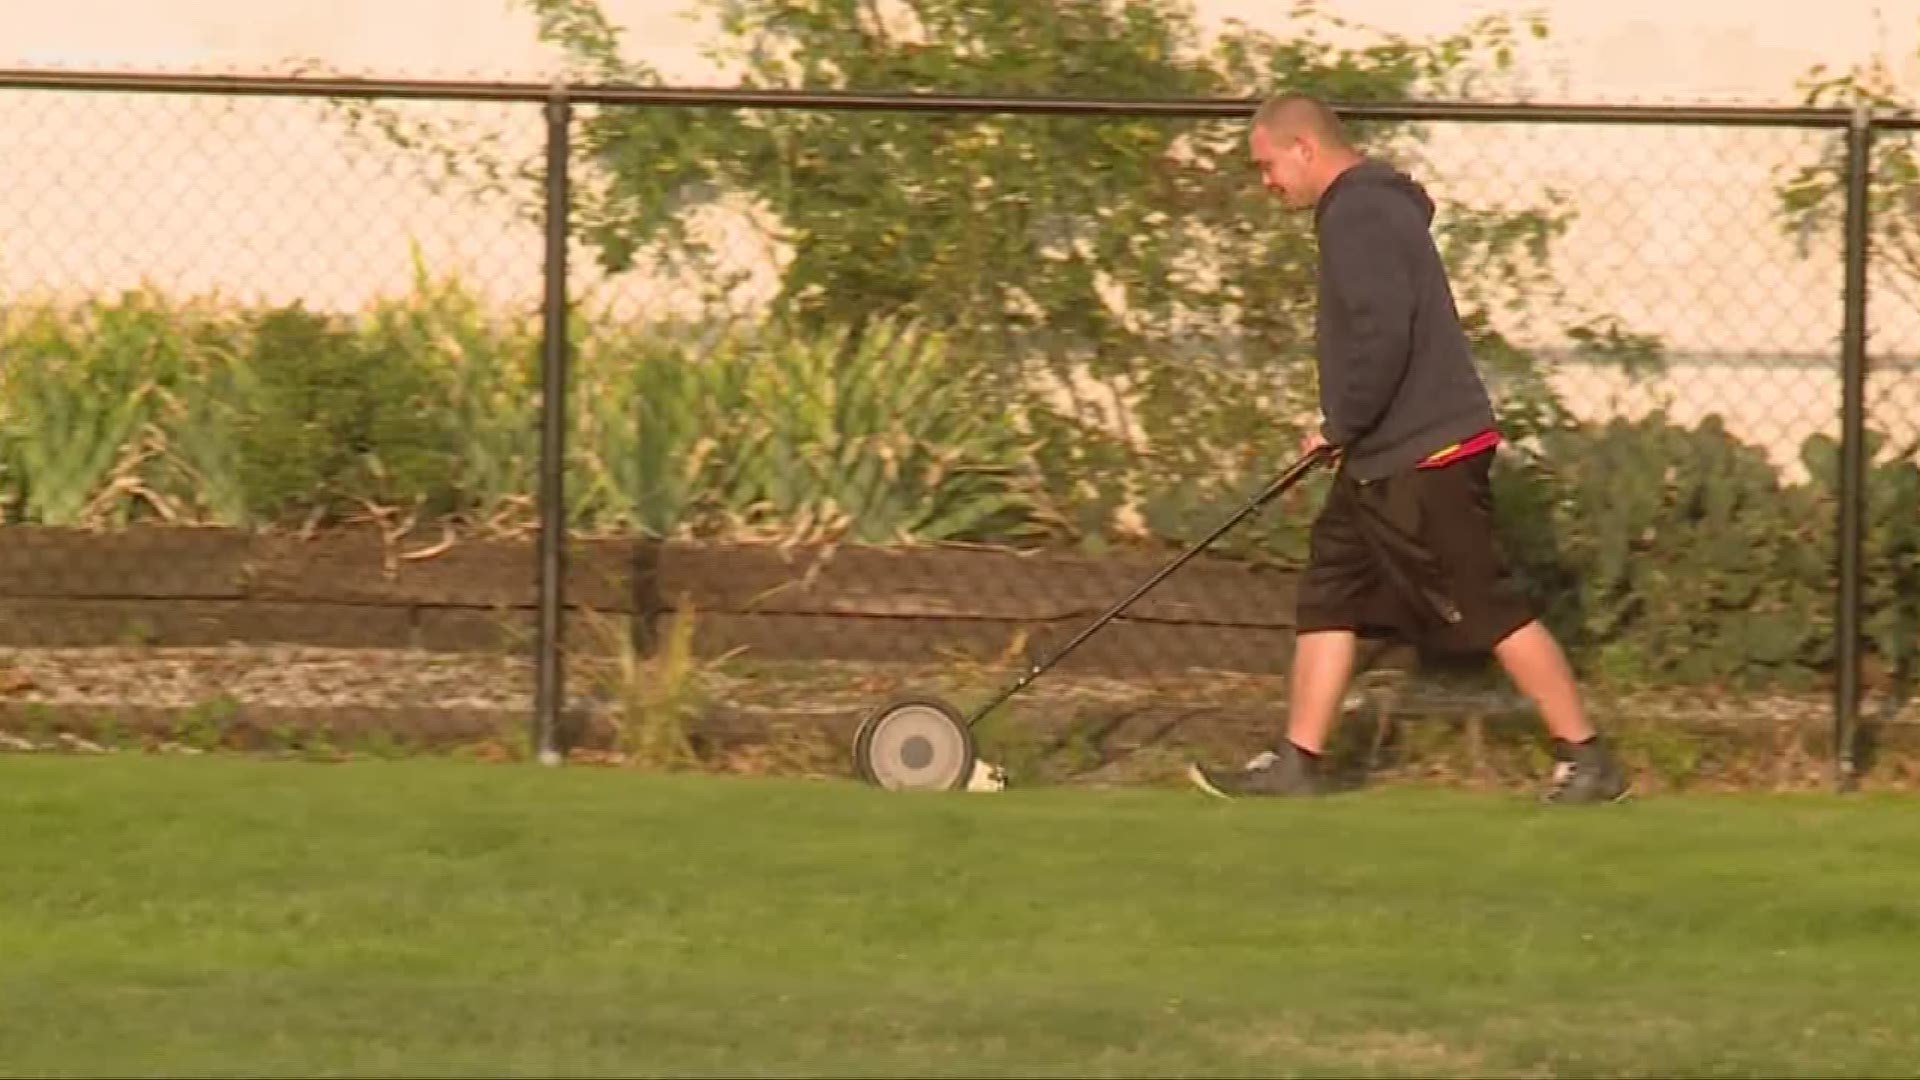 man sentenced to hand mow a football field after mowing obscenities into the lawn